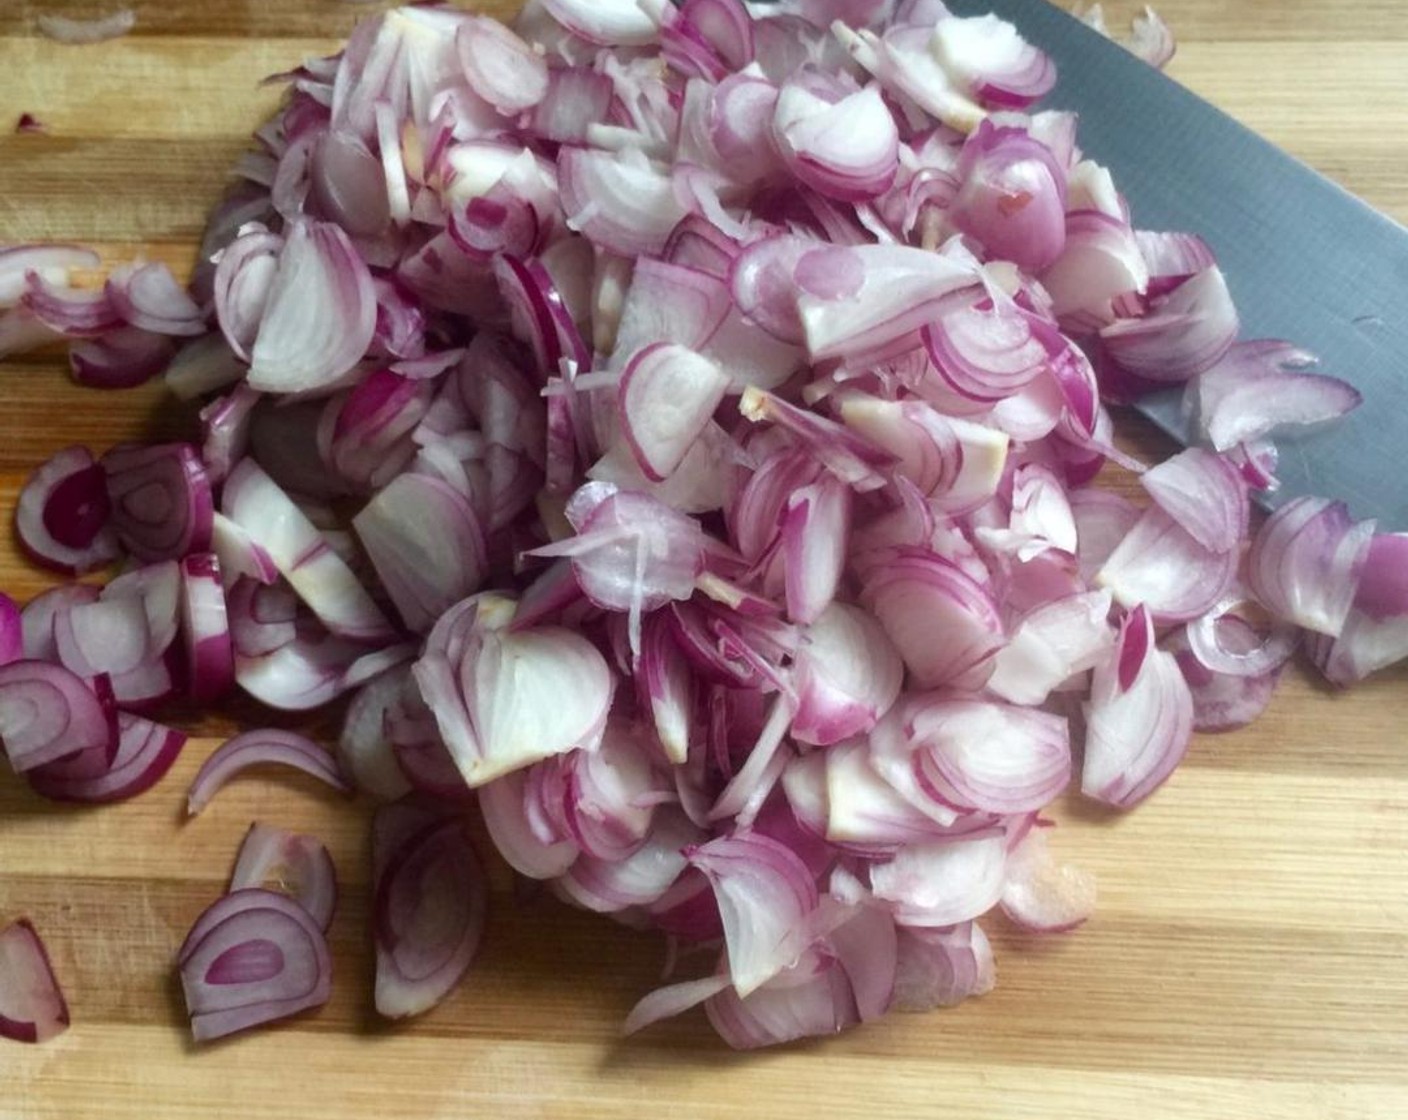 step 2 Drain well. Slice shallots thinly and uniformly (about 2-3mm thickness) to ensure even cooking.